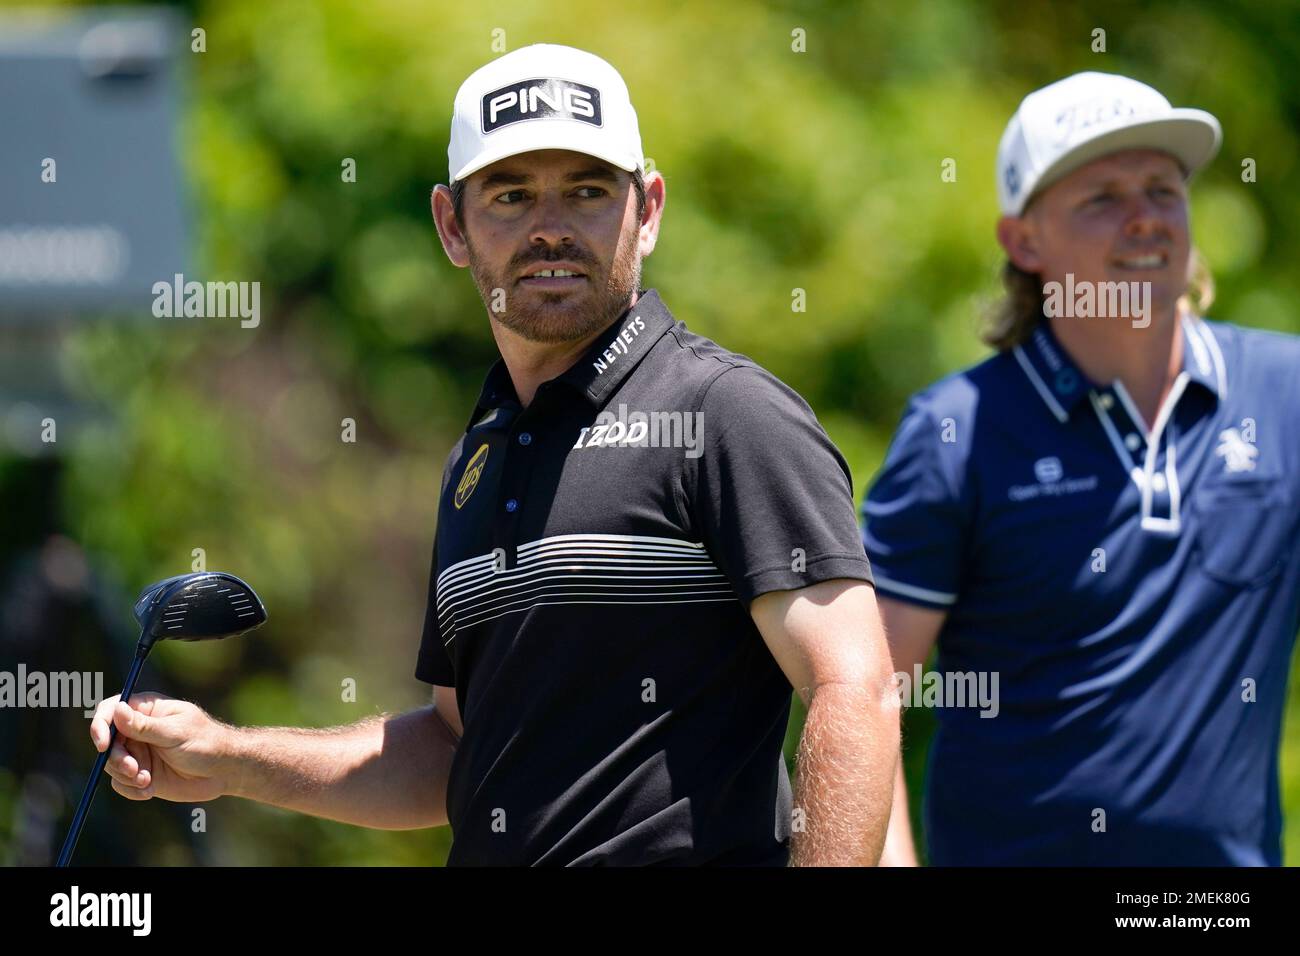 Louis Oosthuizen, of South Africa, left, watches his shot off the second tee during the final round of the PGA Zurich Classic golf tournament at TPC Louisiana in Avondale, La., Sunday, April